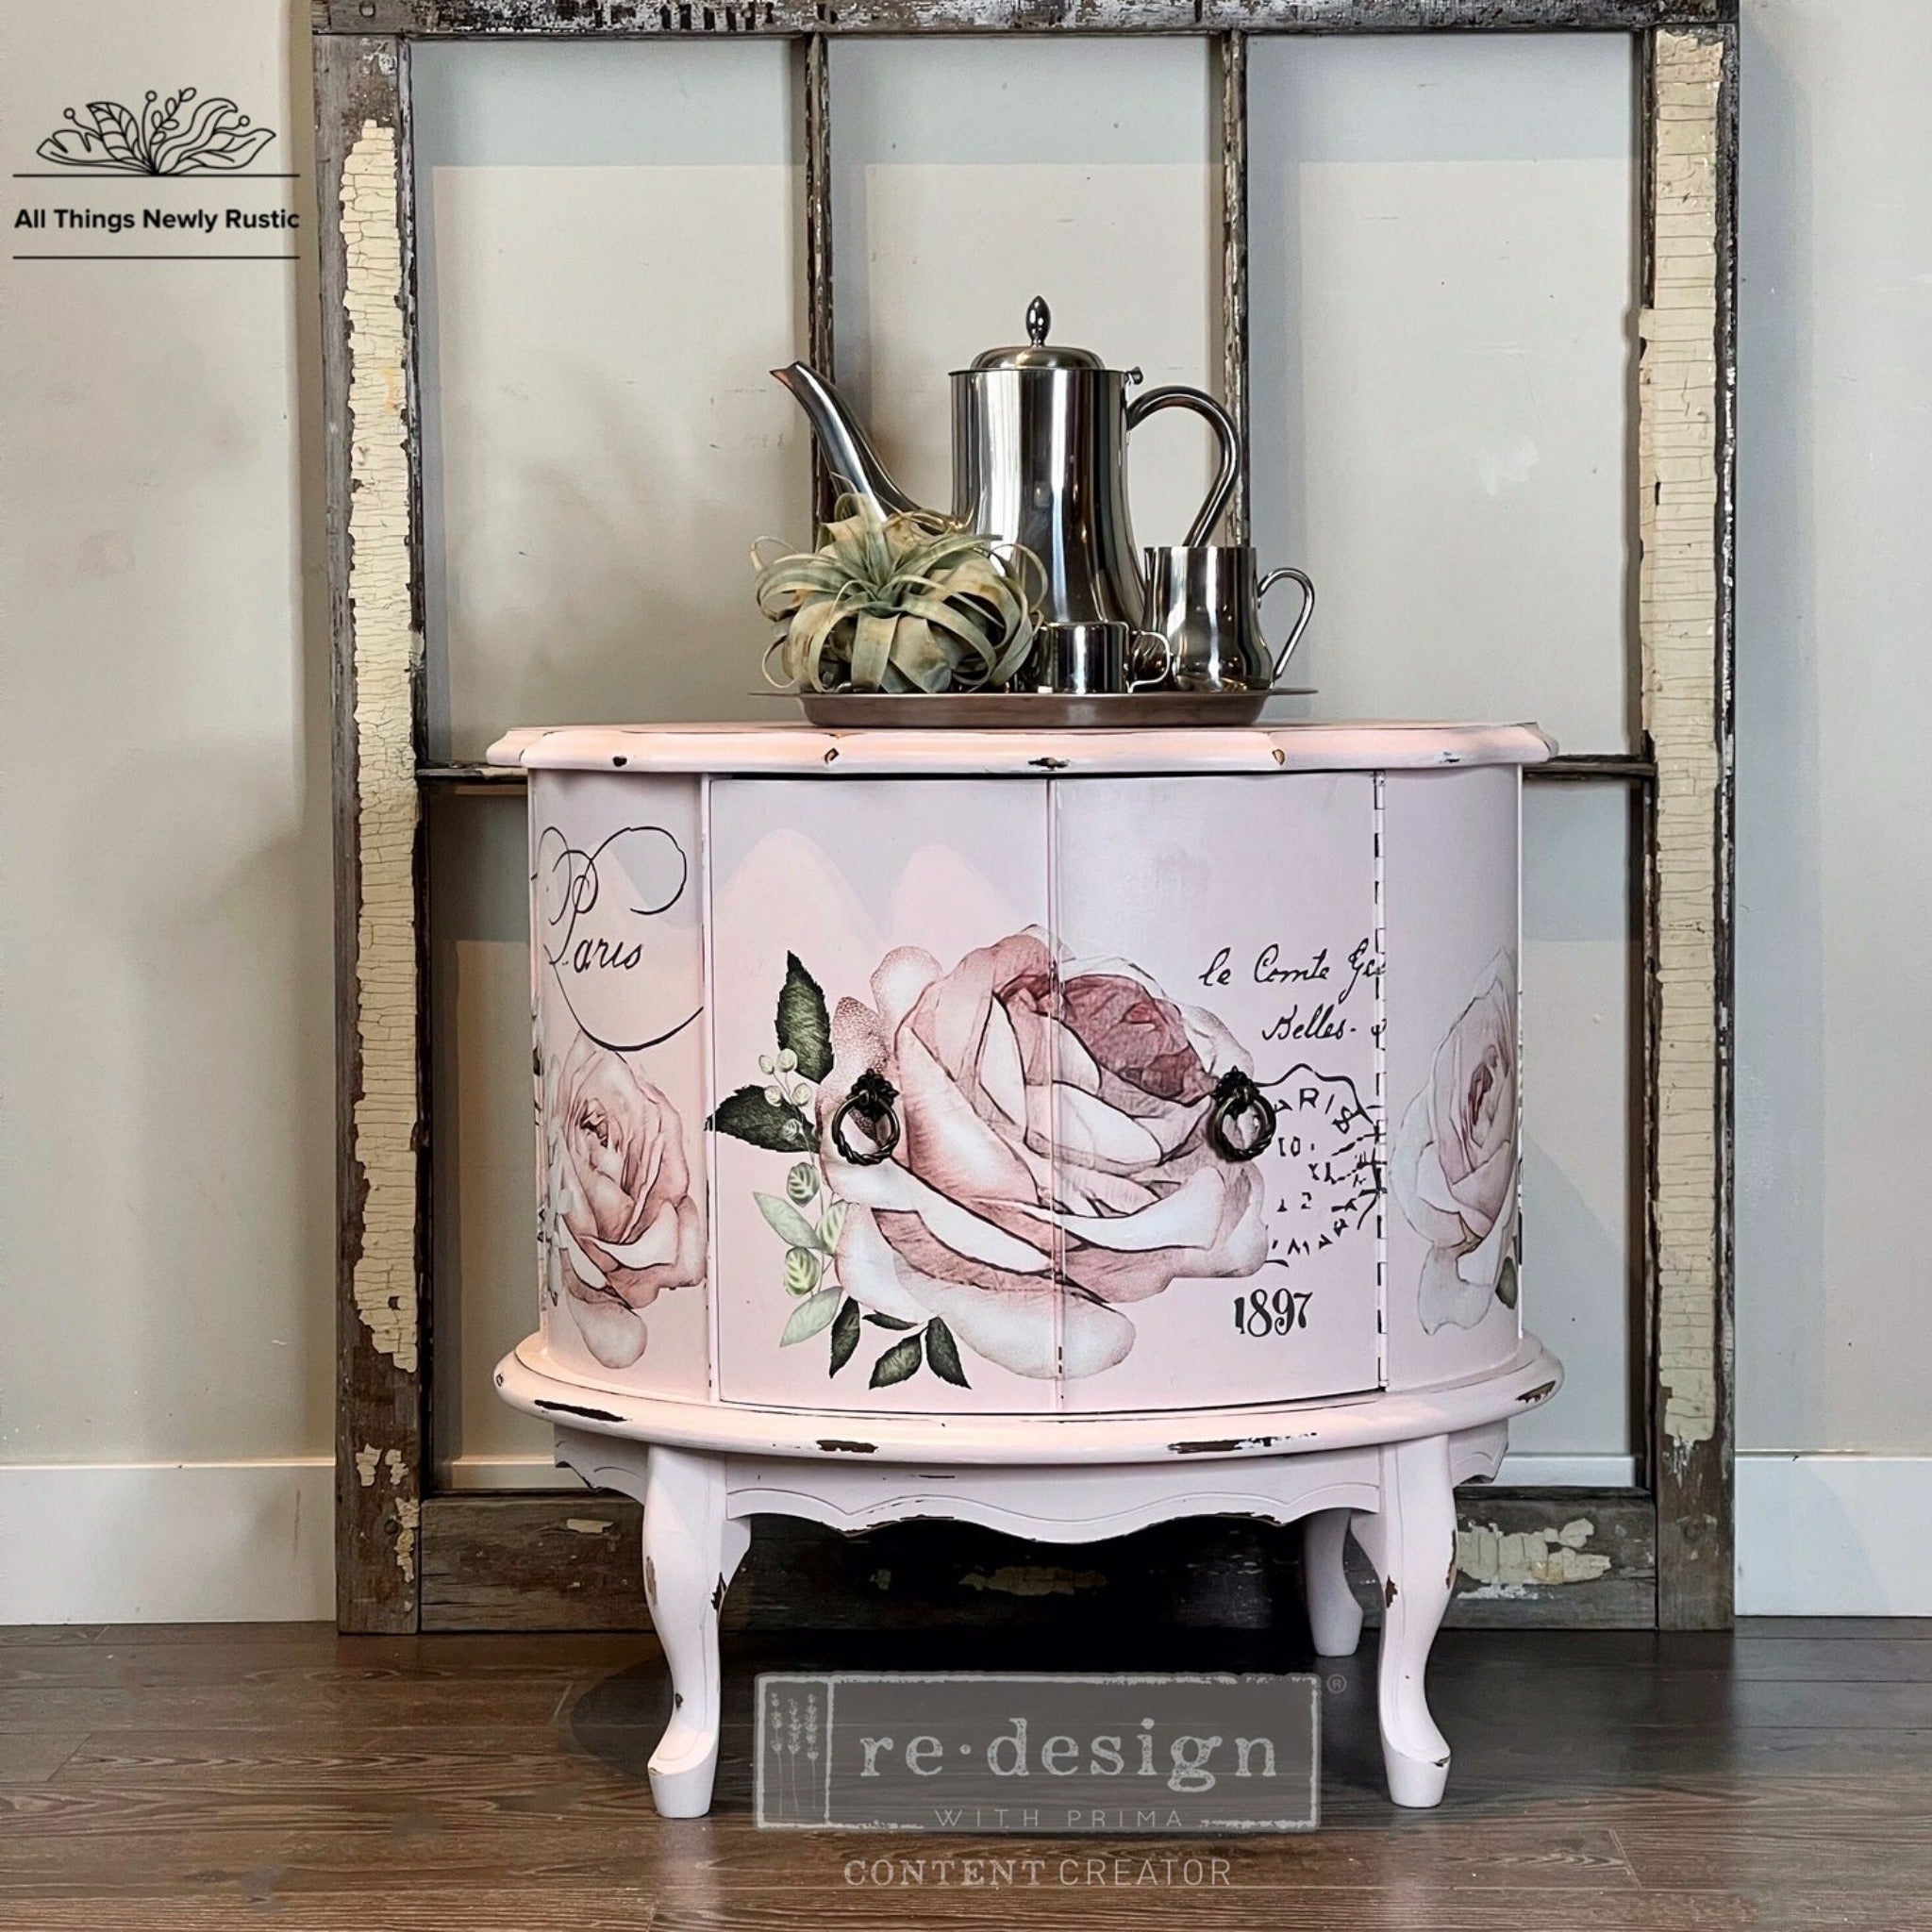 A vintage round drum table refurbished by All Things Newly Rustic, a ReDesign with Prima Content Creator, is painted pale pink and features the Chatellerault transfer on its doors.